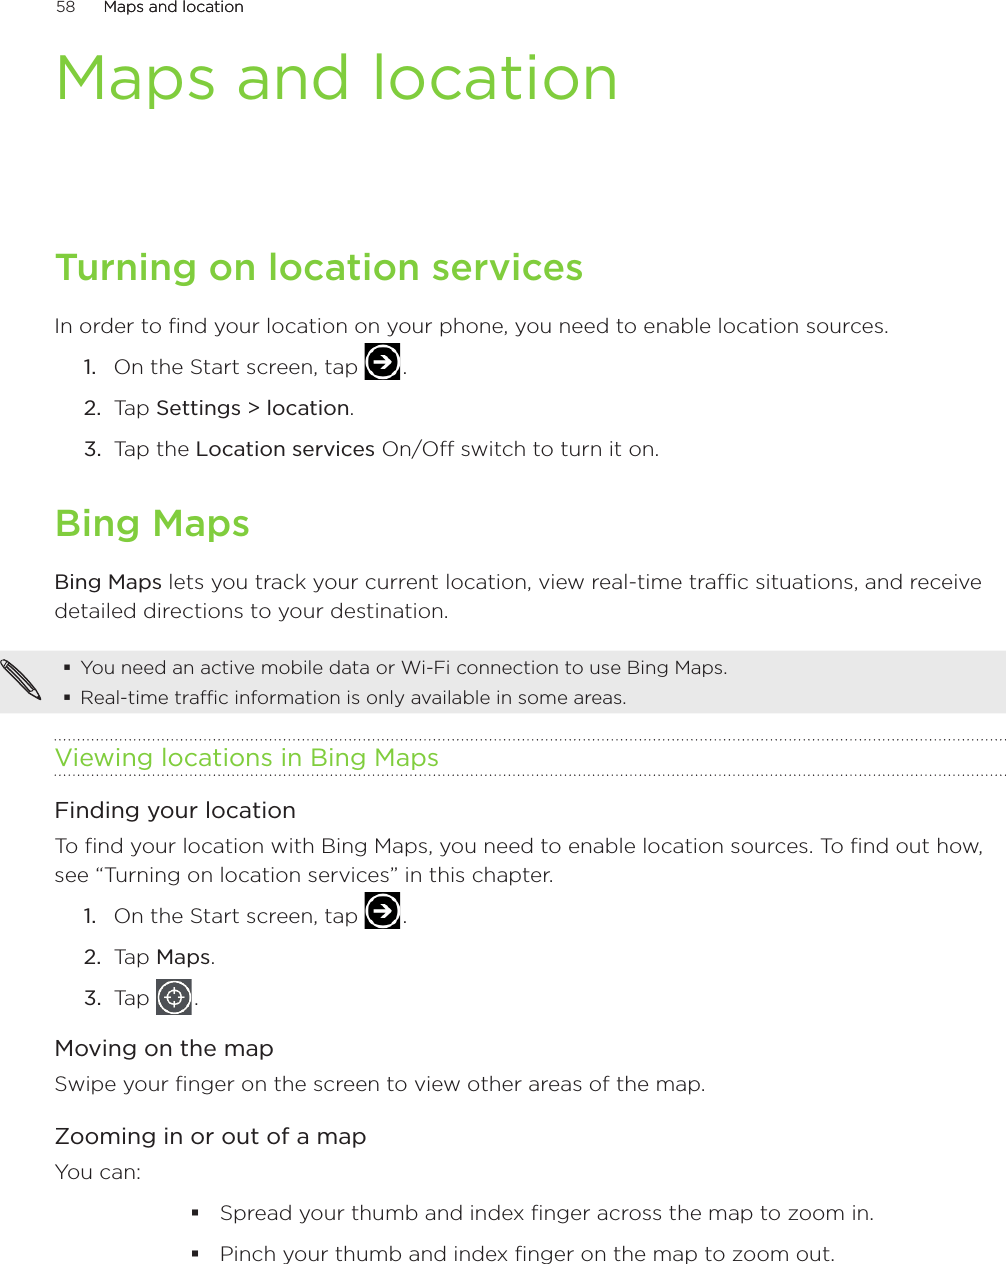 58      Maps and locationMaps and location      Maps and locationTurning on location servicesIn order to find your location on your phone, you need to enable location sources.On the Start screen, tap   .Tap Settings &gt; location.Tap the Location services On/Off switch to turn it on. Bing MapsBing Maps lets you track your current location, view real-time traffic situations, and receive detailed directions to your destination. You need an active mobile data or Wi-Fi connection to use Bing Maps.Real-time traffic information is only available in some areas.Viewing locations in Bing MapsFinding your locationTo find your location with Bing Maps, you need to enable location sources. To find out how, see “Turning on location services” in this chapter.On the Start screen, tap   .Tap Maps.Tap   .Moving on the mapSwipe your finger on the screen to view other areas of the map.Zooming in or out of a mapYou can:Spread your thumb and index finger across the map to zoom in.Pinch your thumb and index finger on the map to zoom out.1.2.3.1.2.3.